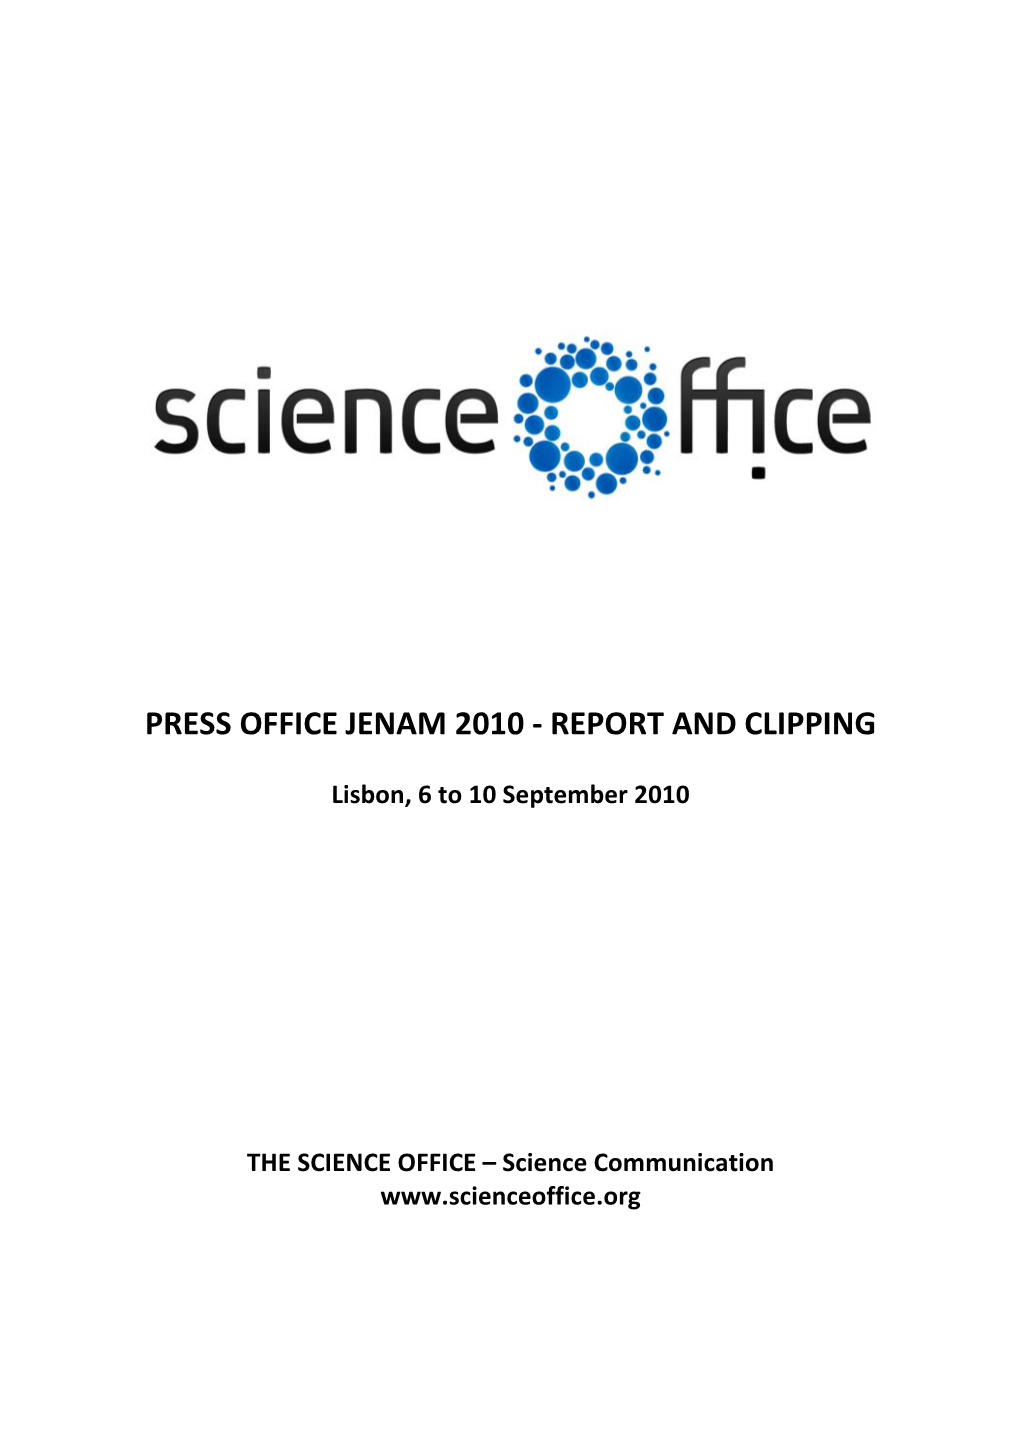 Press Office Jenam 2010 - Report and Clipping